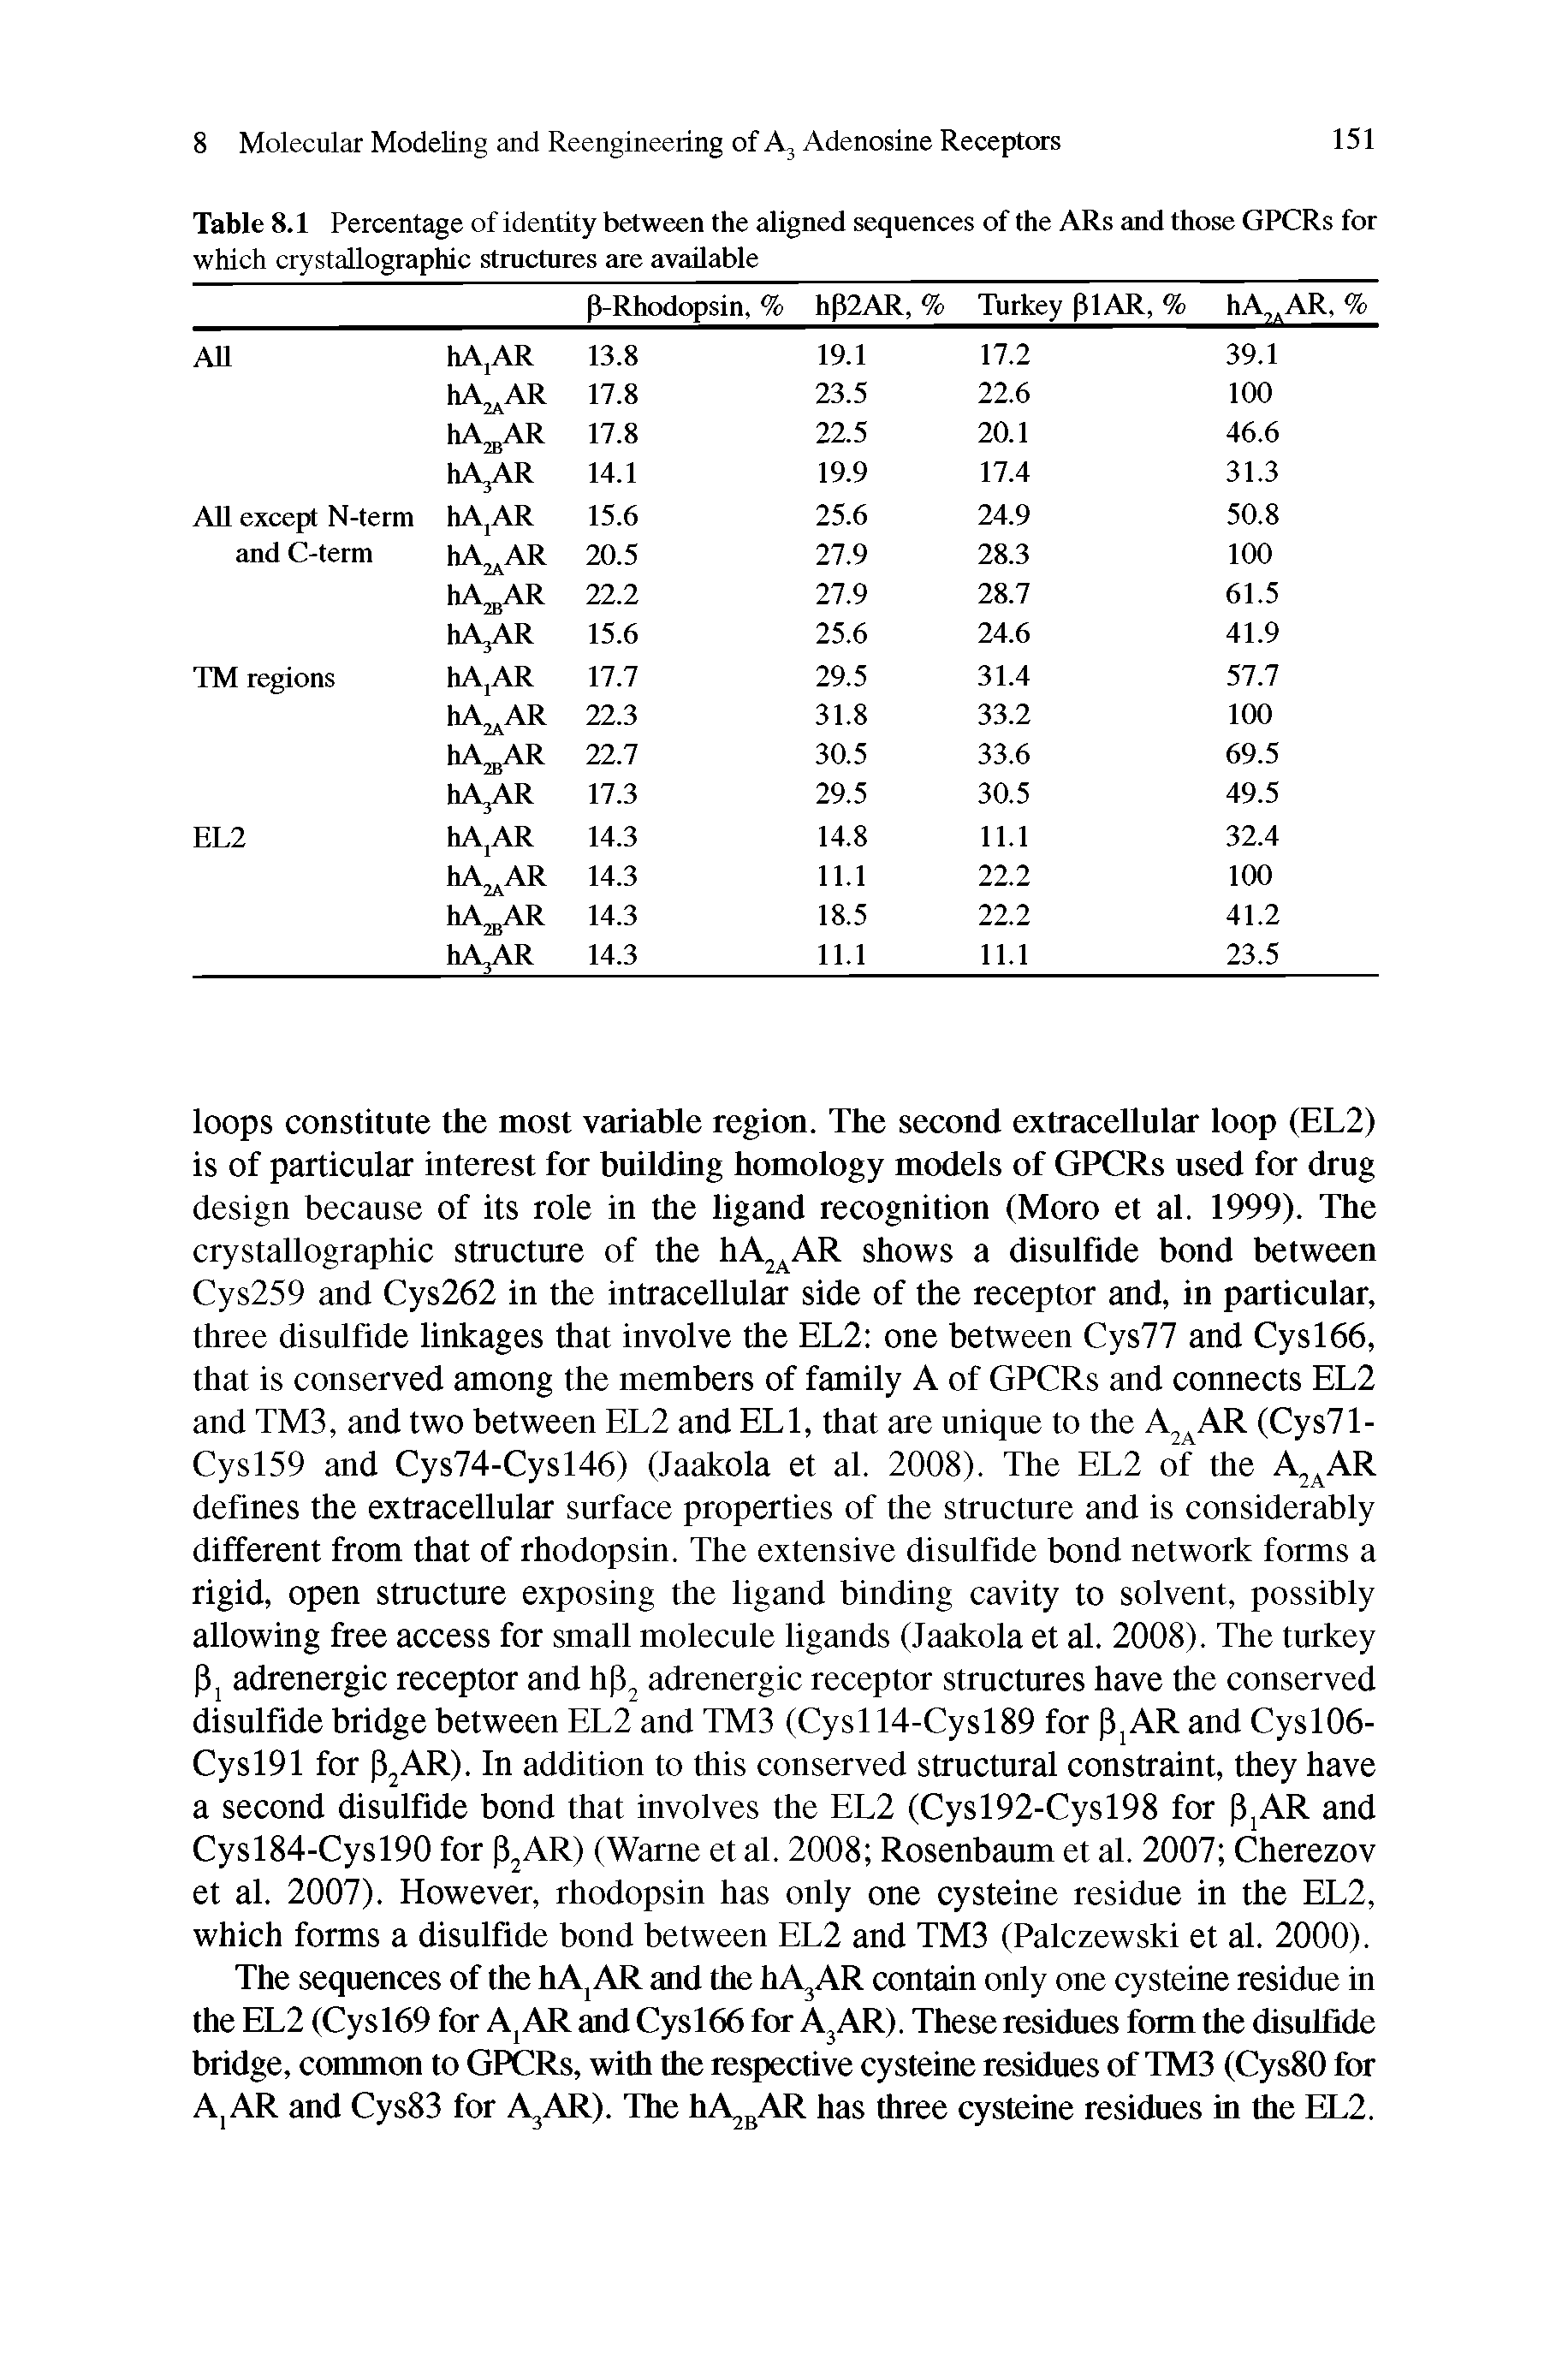 Table 8.1 Percentage of identity between the aligned sequences of the ARs and those GPCRs for which crystallographic structures are available...